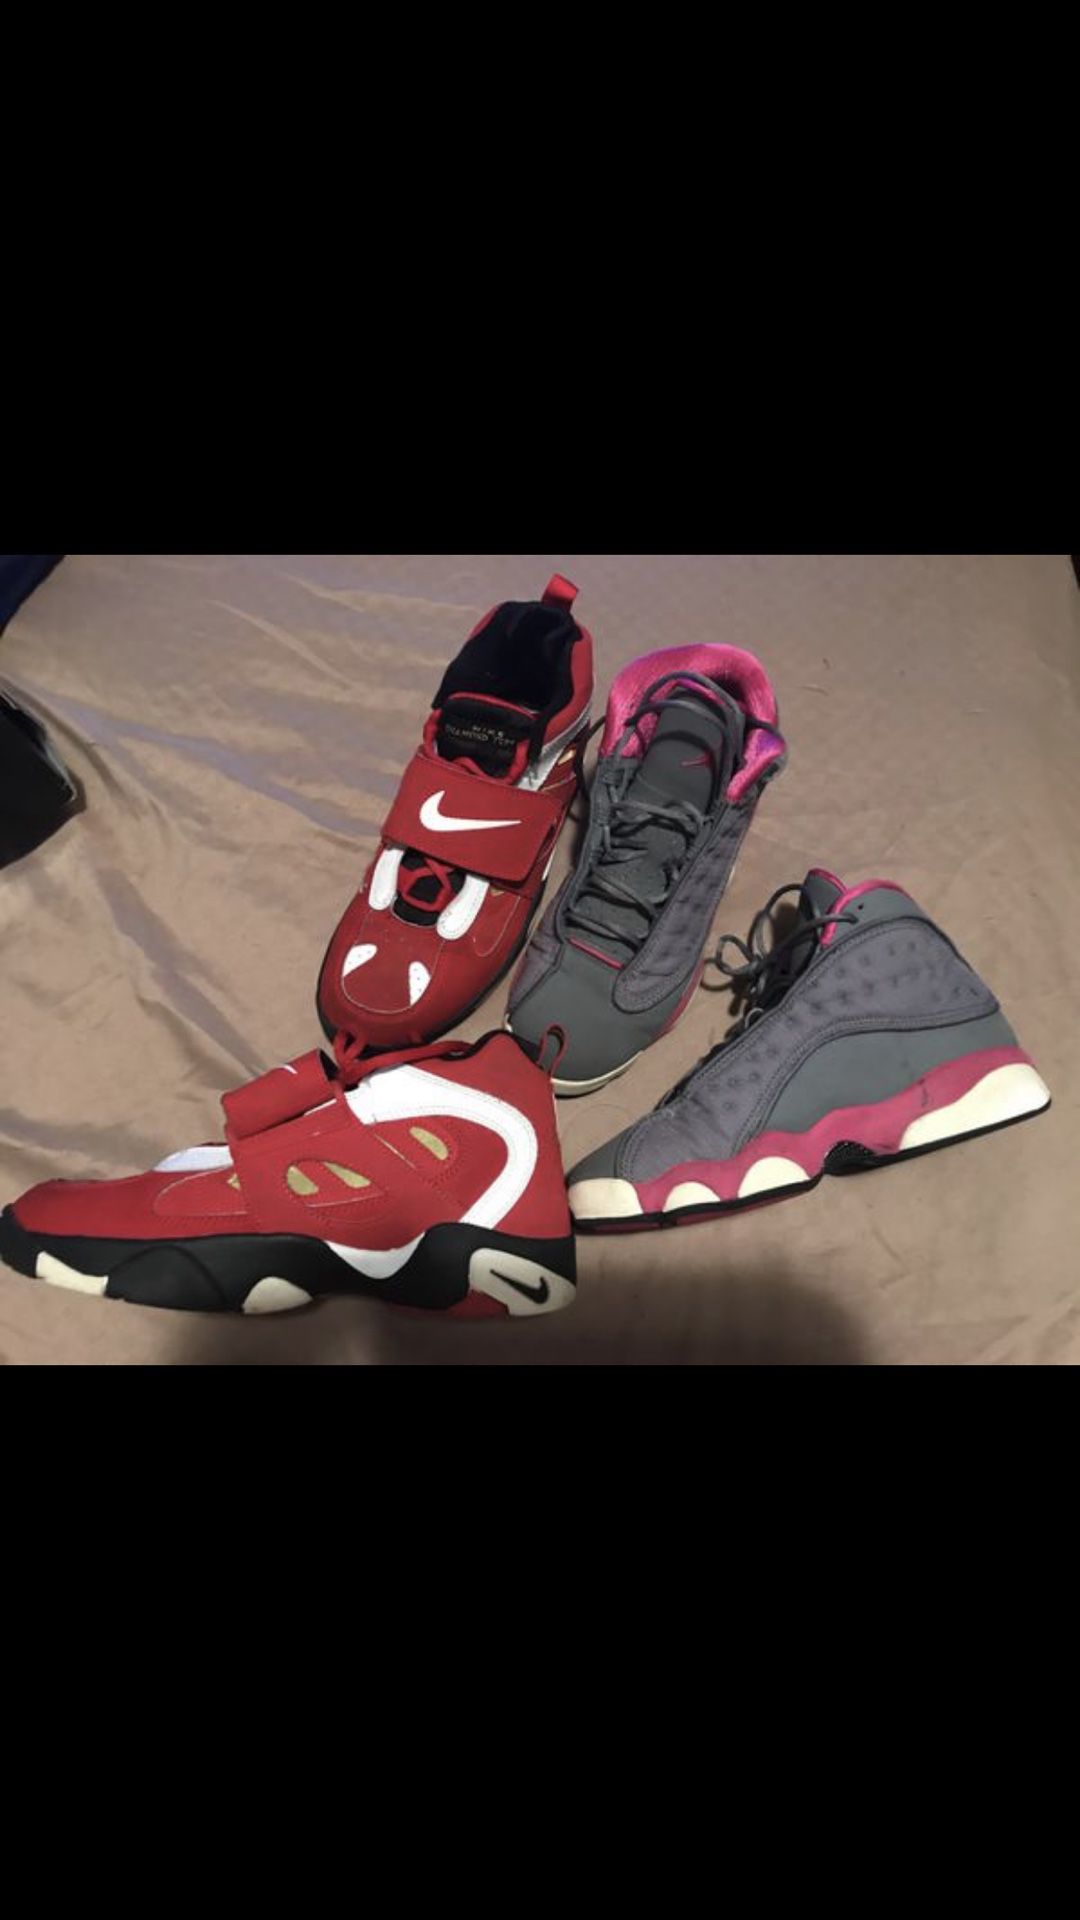 Jordan and Nike shoes 6 1/2 boys in great condition $50 for both